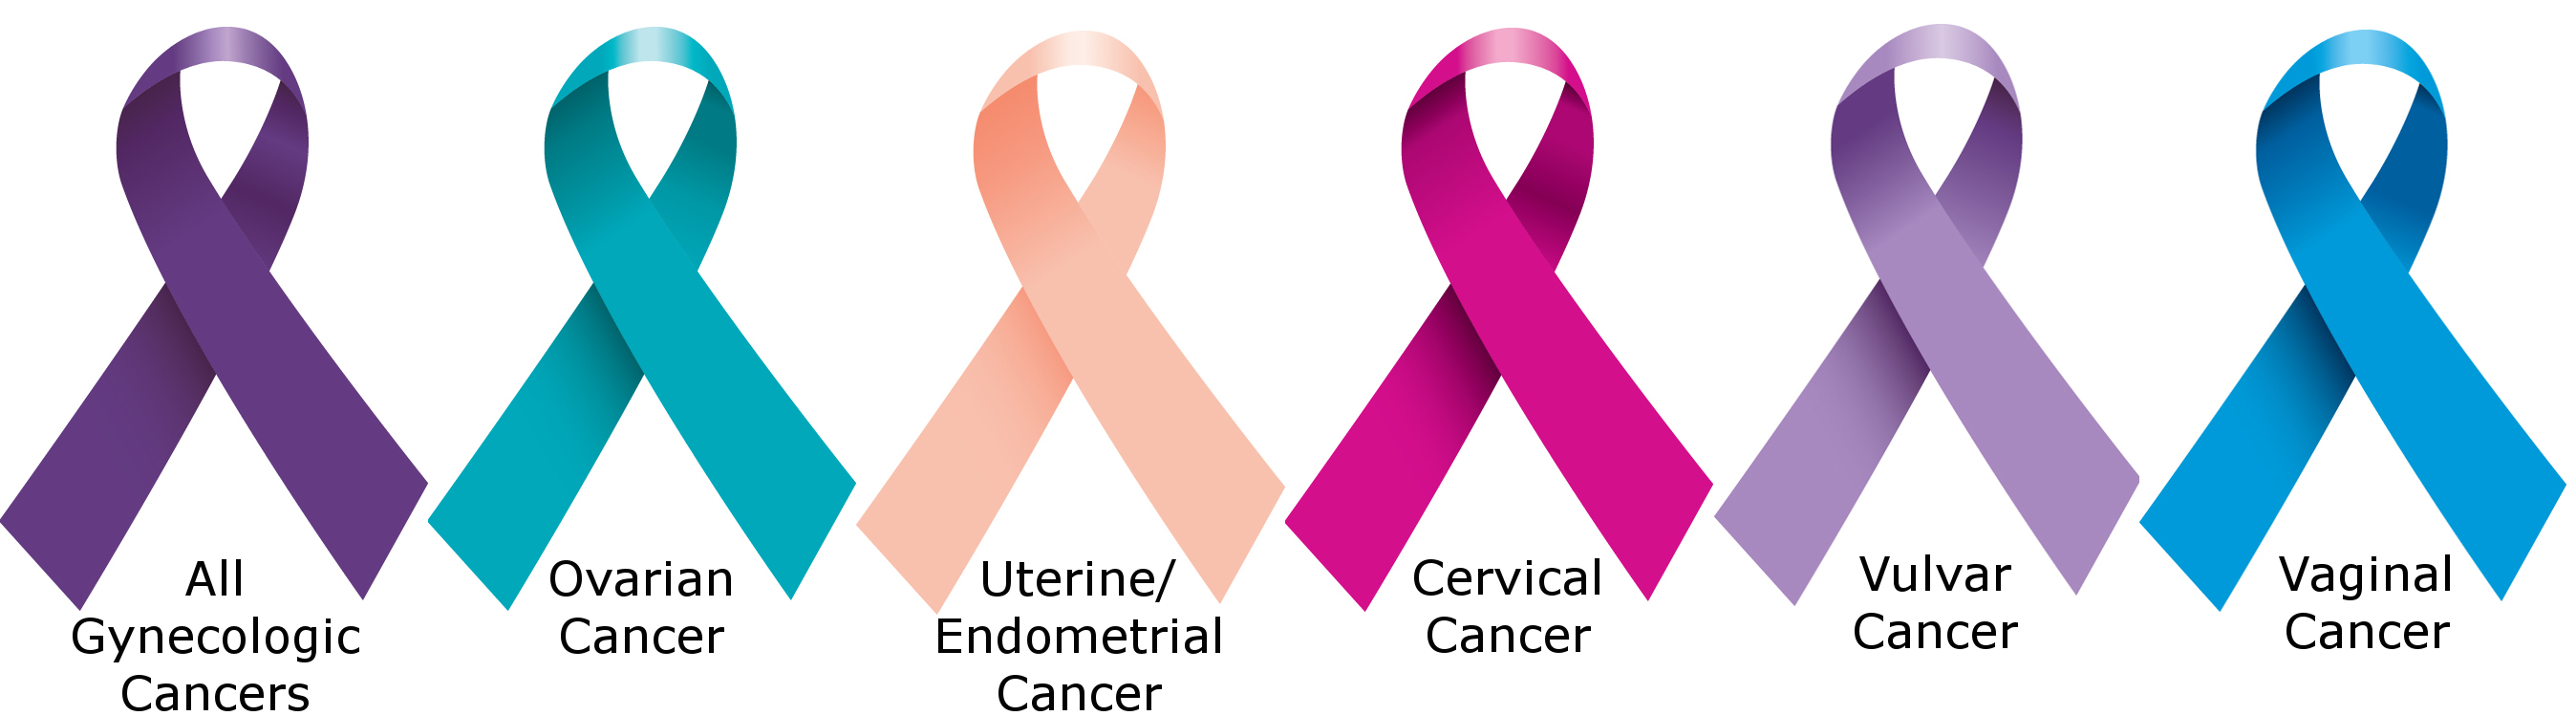 There are many different types of cancer and ways to raise awareness for each. Graphic: Google Images